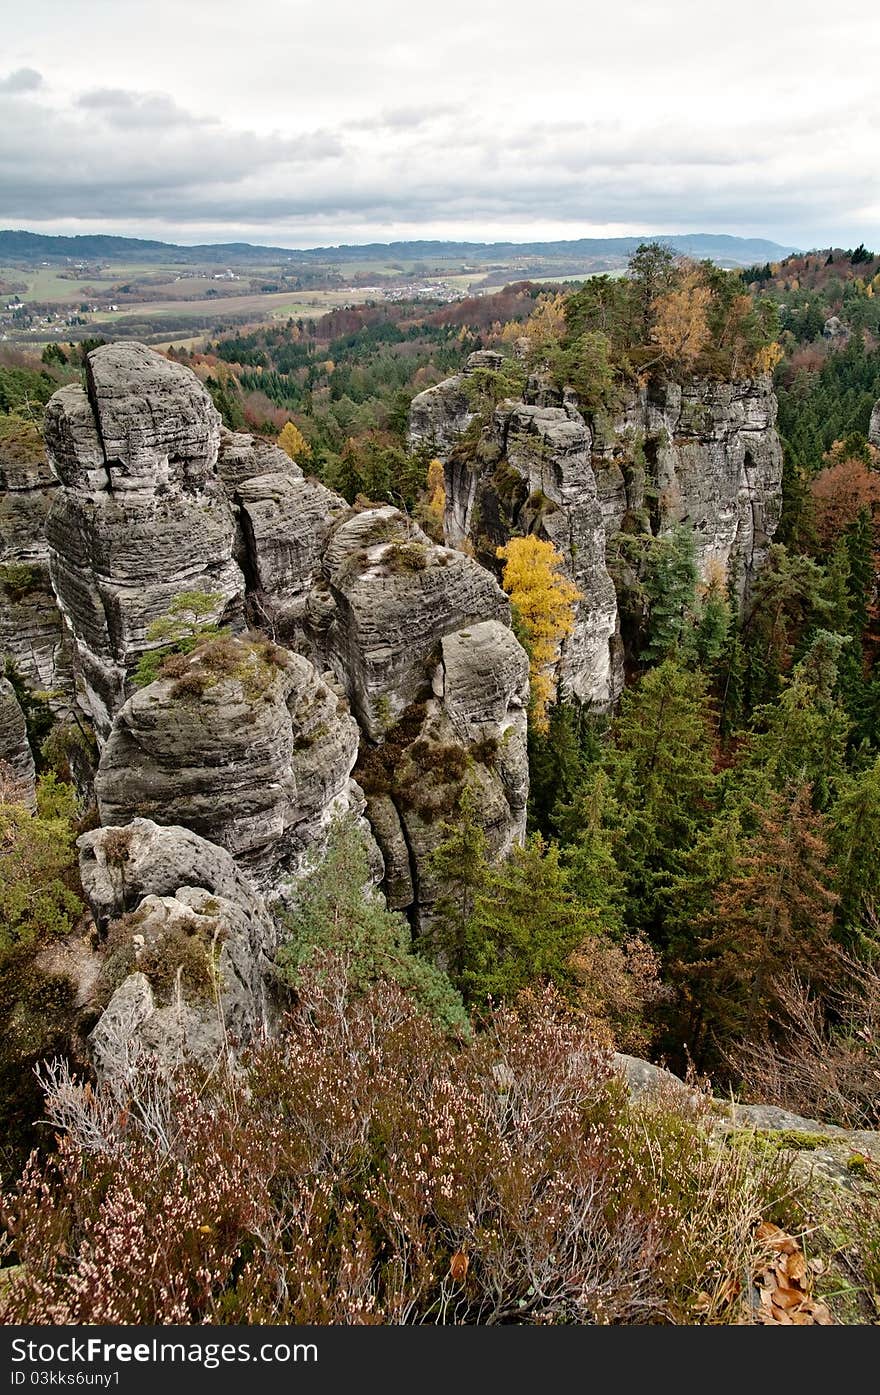 Sandstone rocks in the northern part of the Czech Republic (central Europe) - Czech Paradise. Sandstone rocks in the northern part of the Czech Republic (central Europe) - Czech Paradise